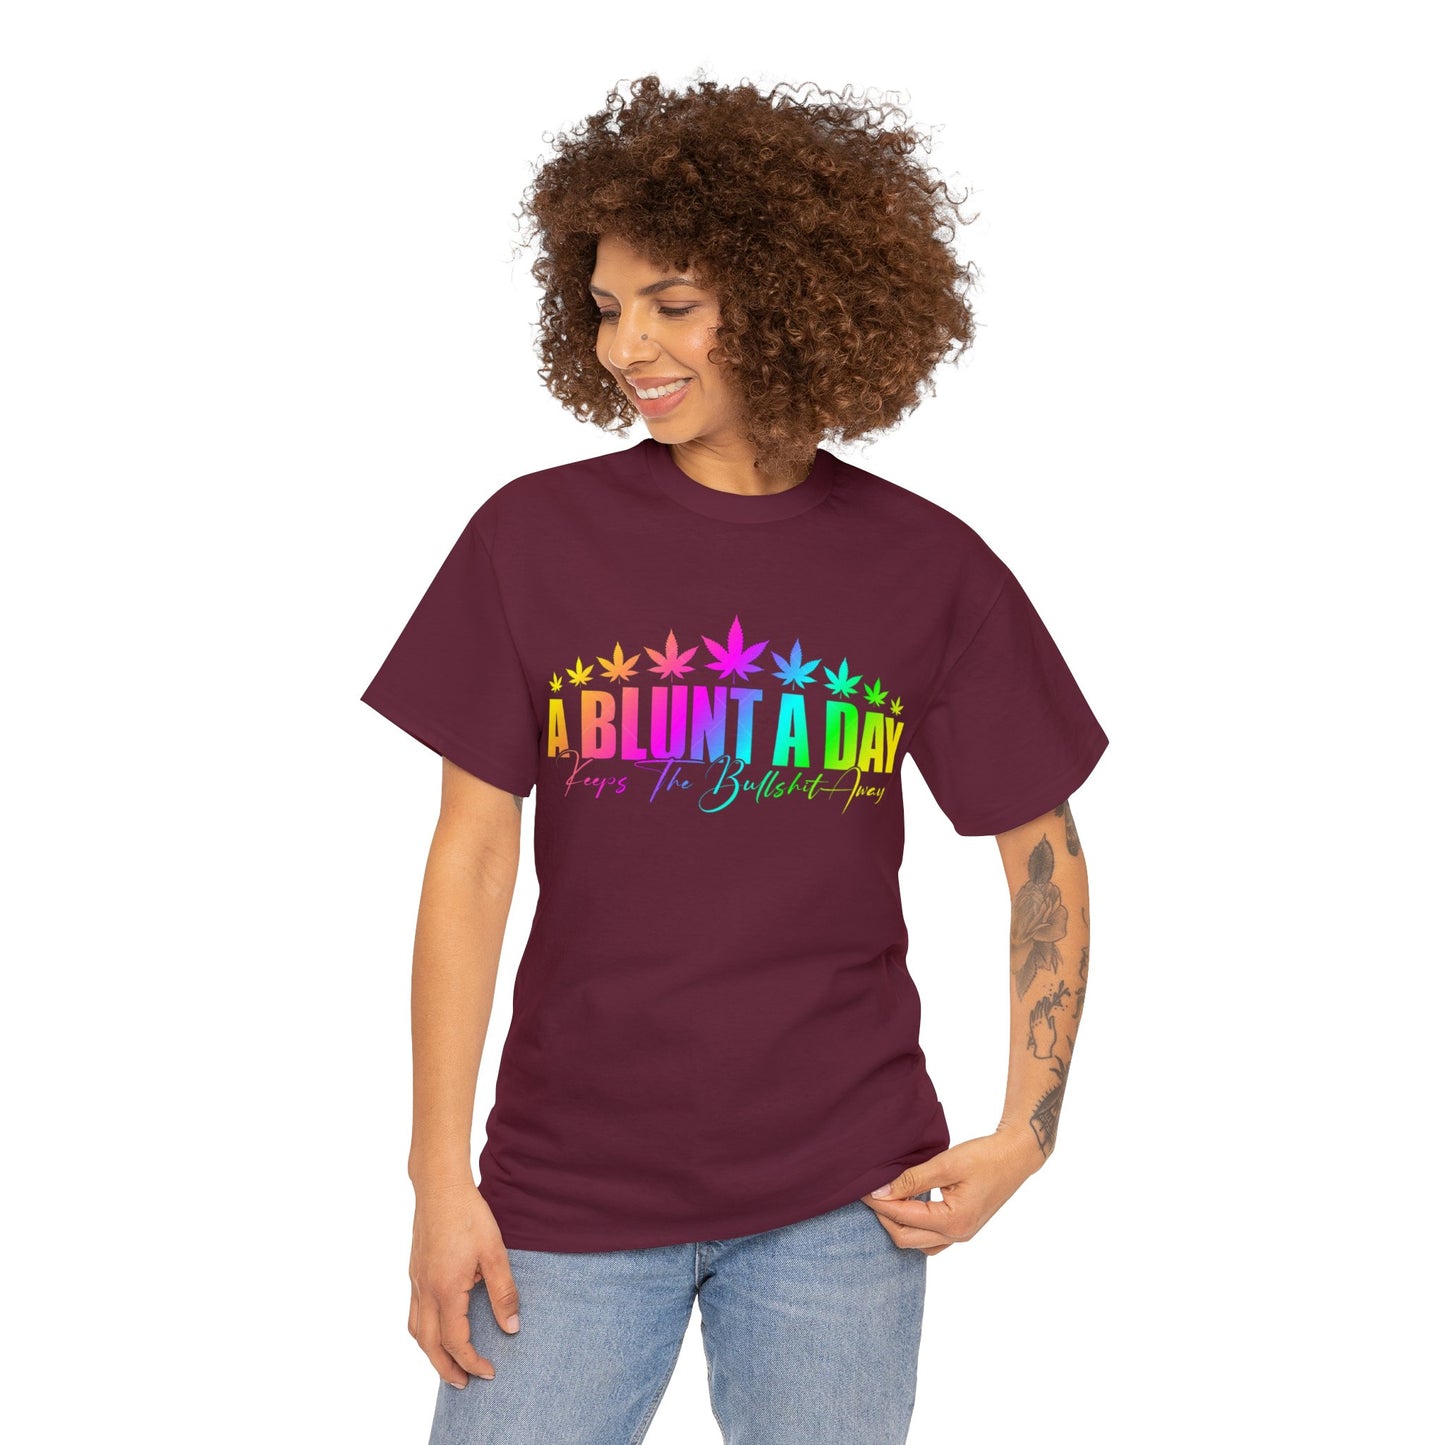 Blunt A Day Tee